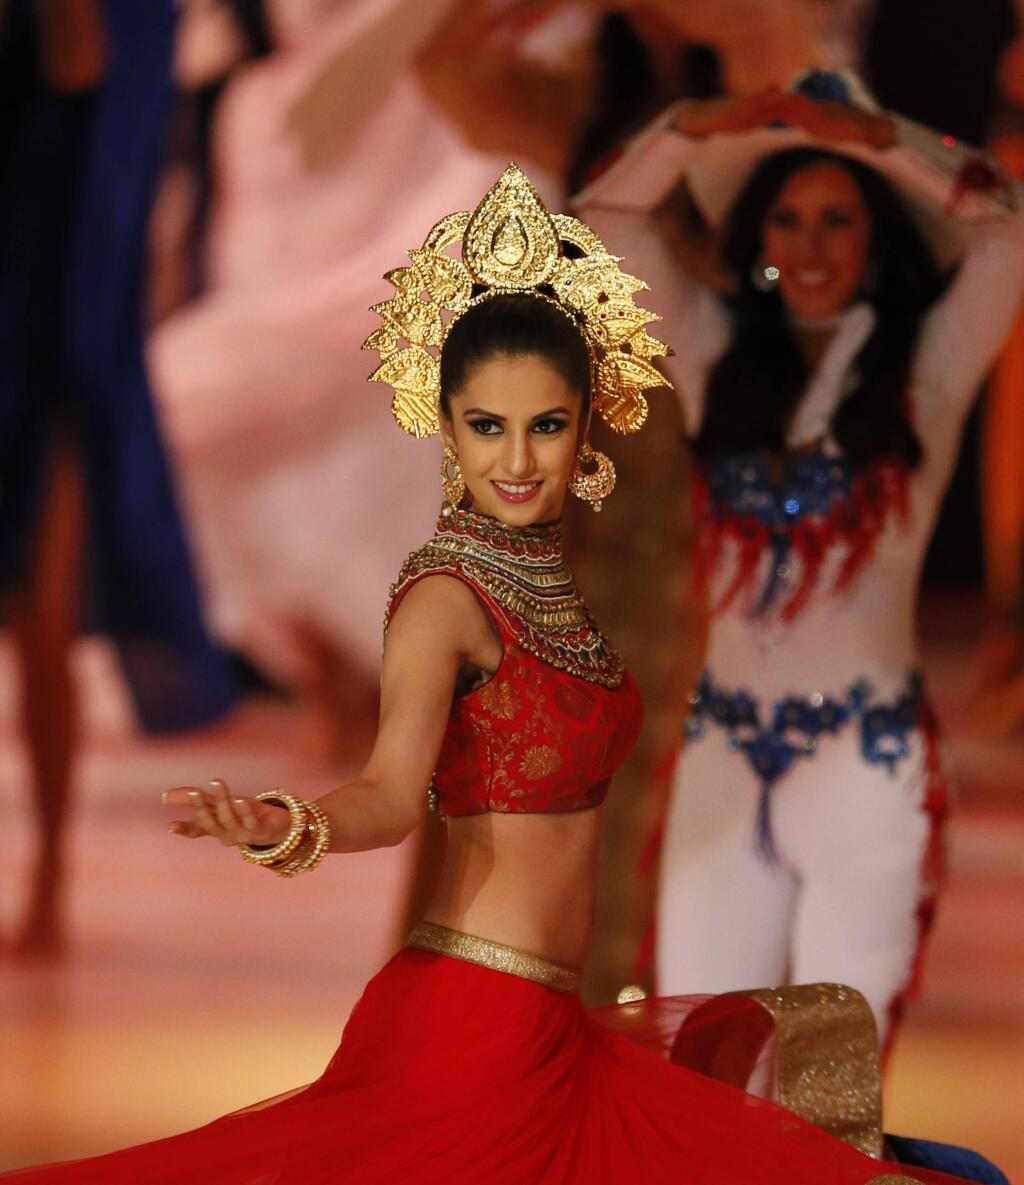 Miss India Koyal Rana dances on stage during a segment of the Miss World competition, at the ExCel centre, in London, Sunday, Dec. 14, 2014. (AP Photo/Alastair Grant)